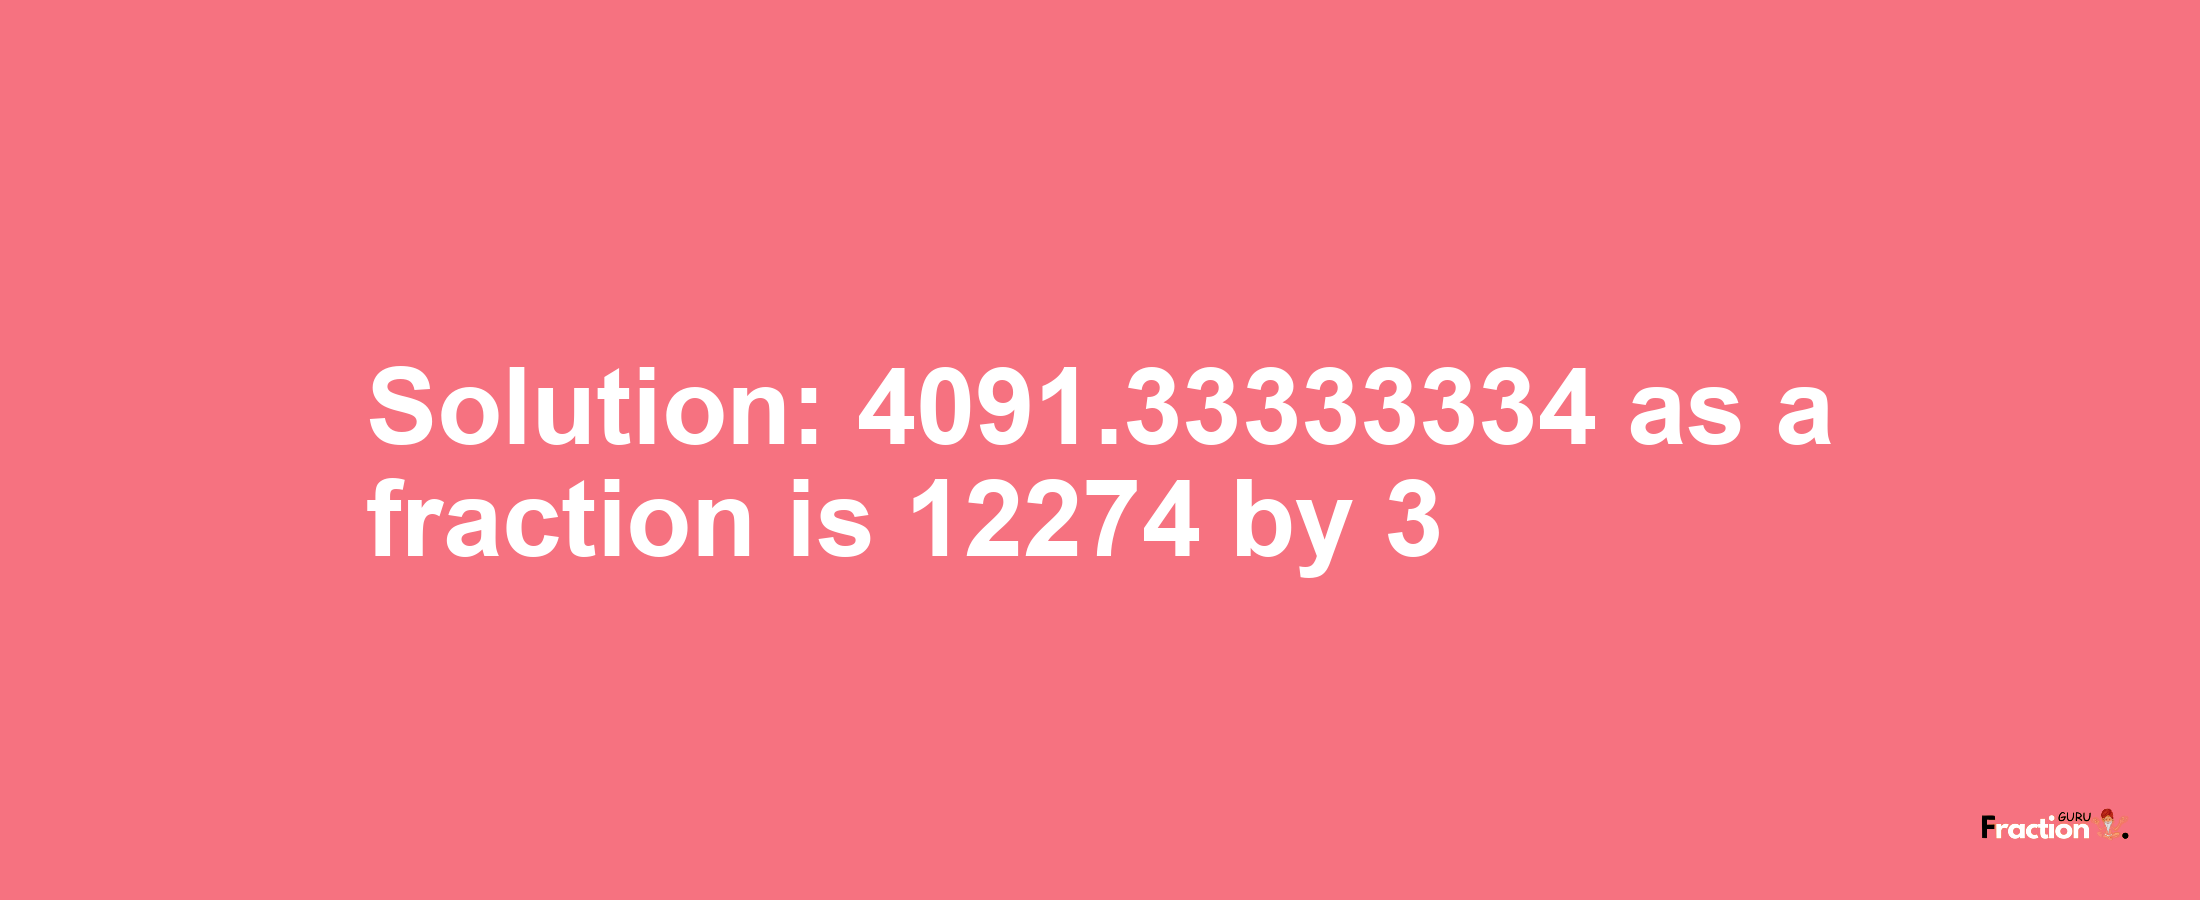 Solution:4091.33333334 as a fraction is 12274/3